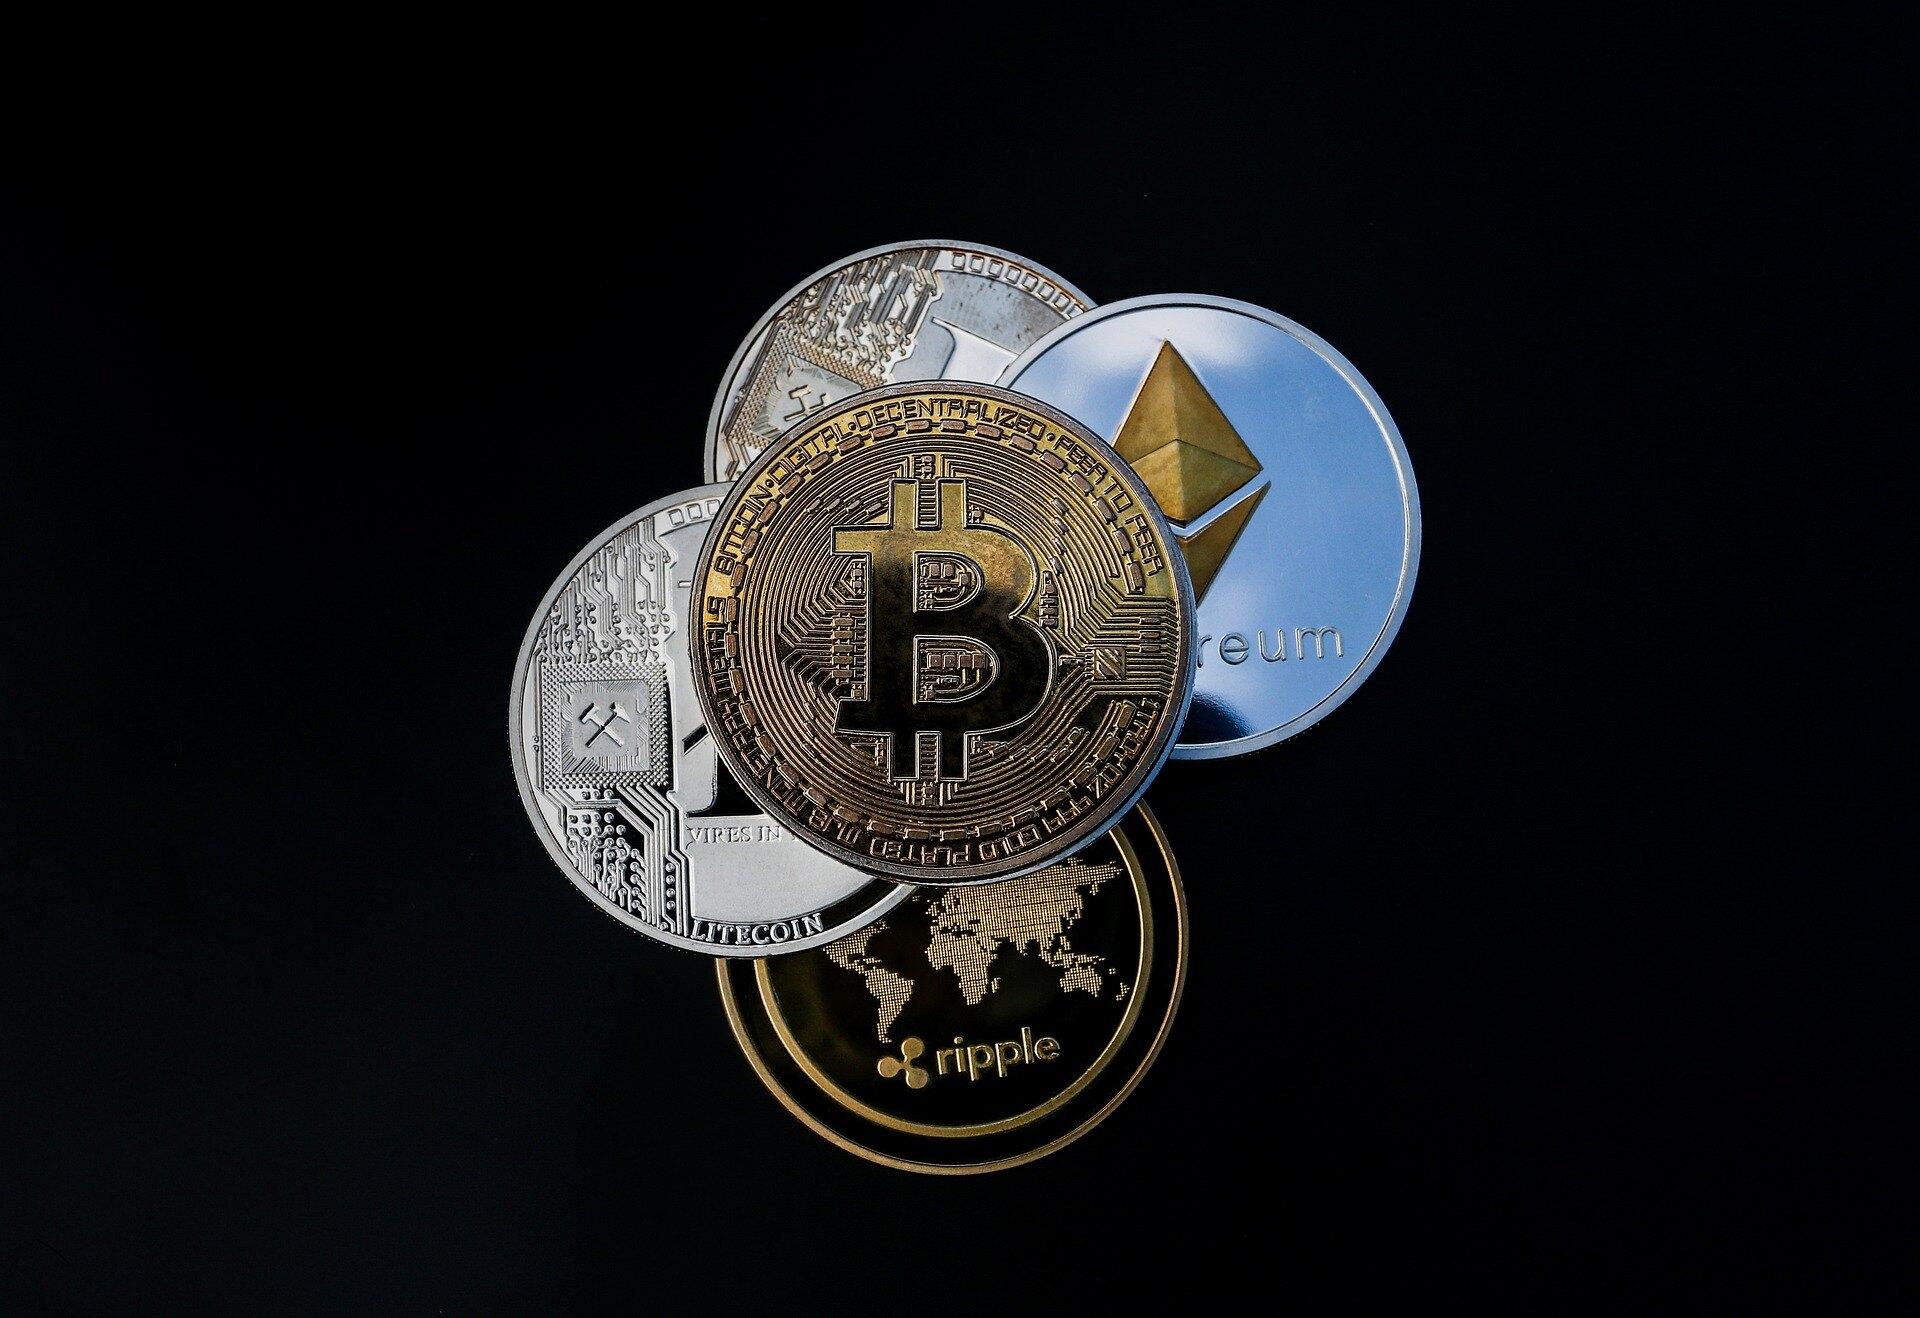 A golden bitcoin crypto coin sitting on top of a silver ethereum crypto coin and three other coins with a black background.